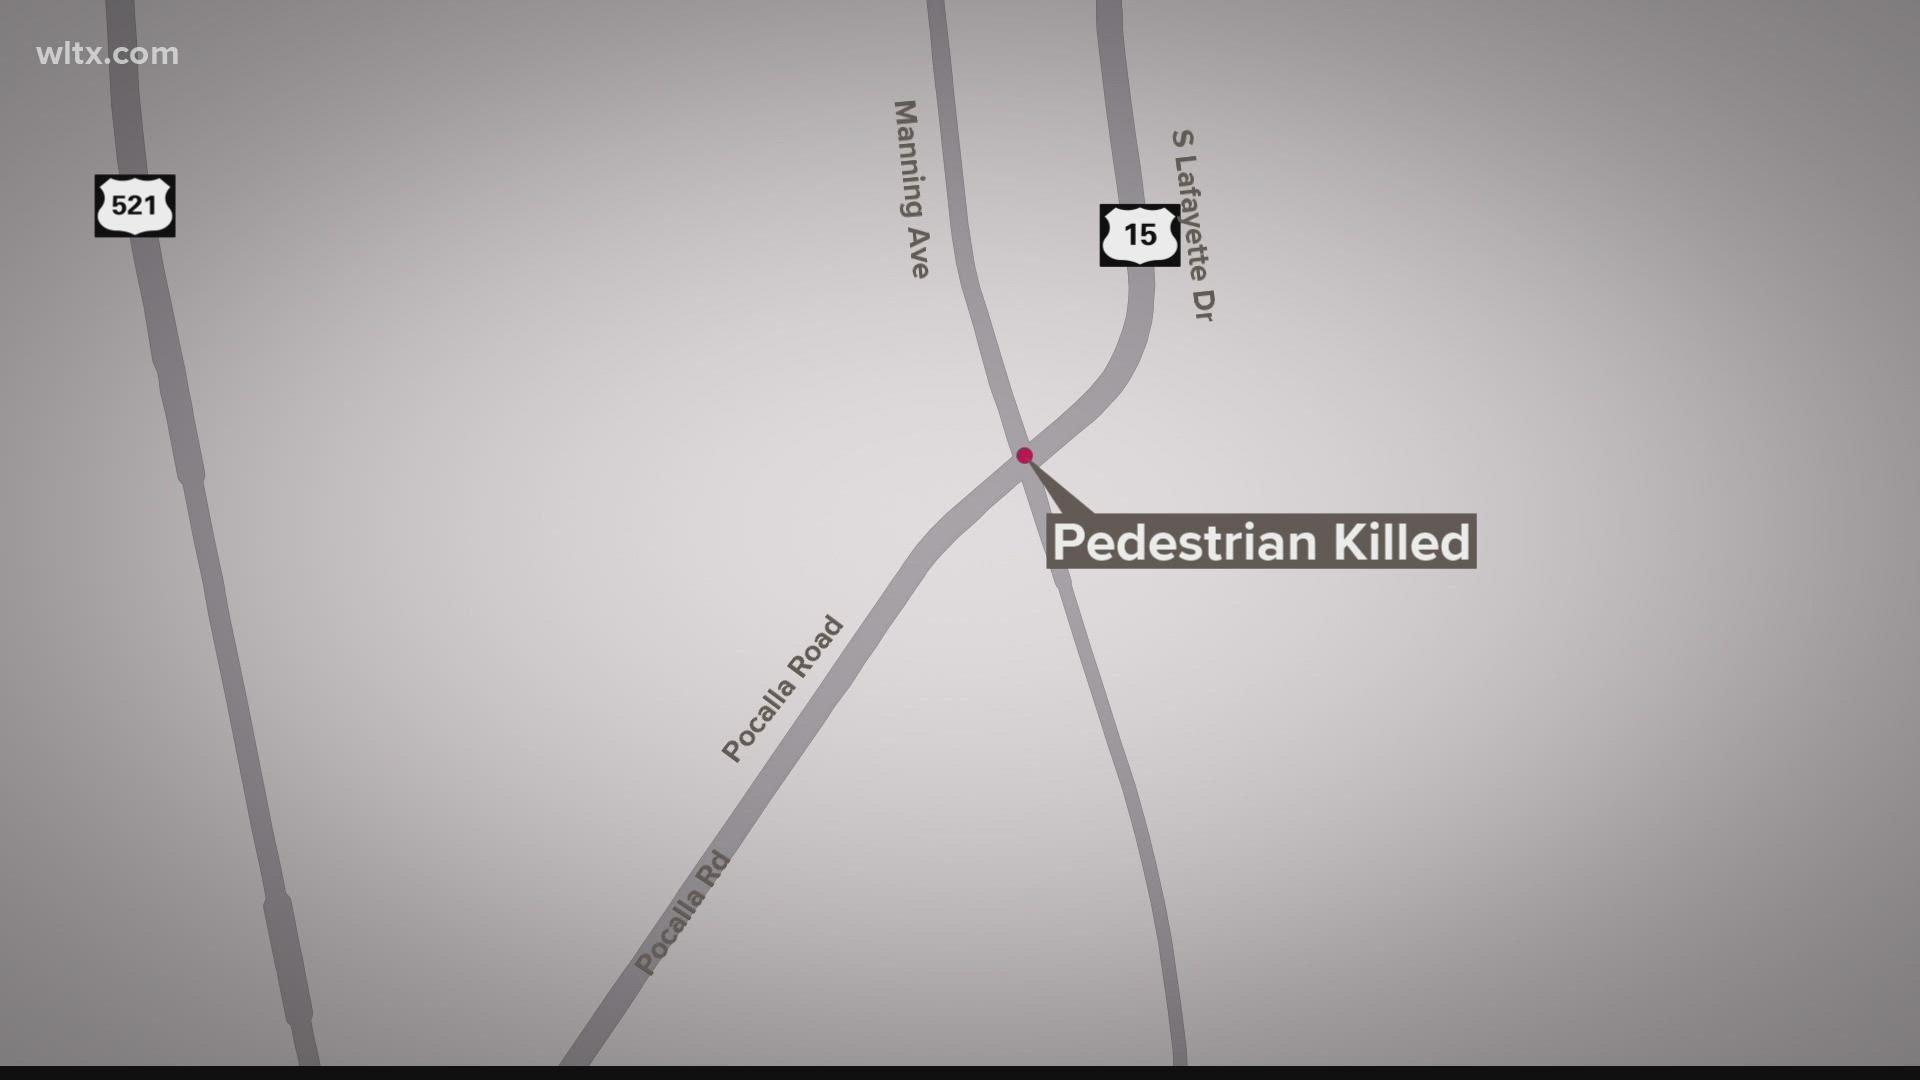 A person is dead after being struck by a Sumter County Sheriff's Office vehicle Friday afternoon.